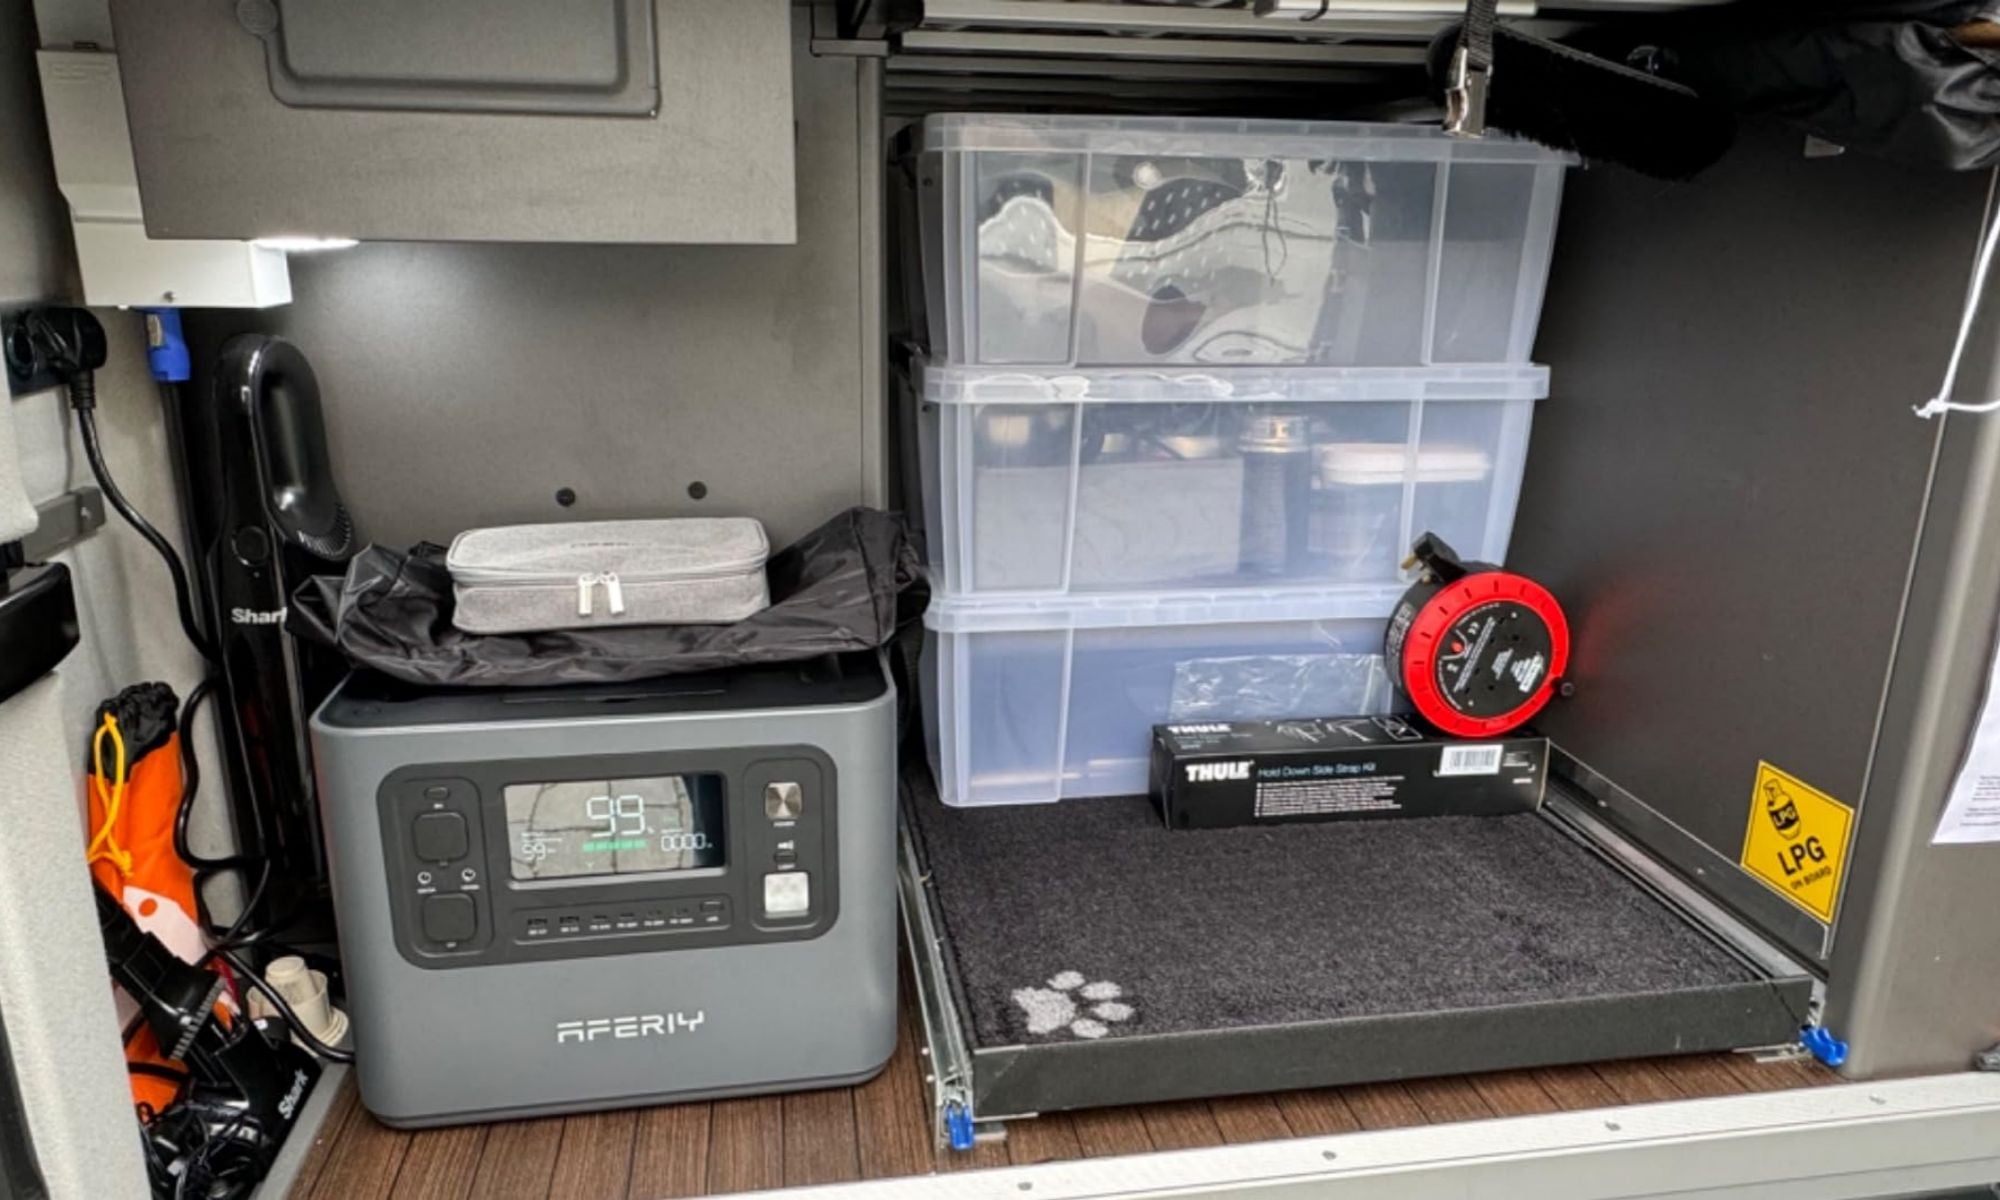 The Aferiy P210 has a compact size for motorhome use